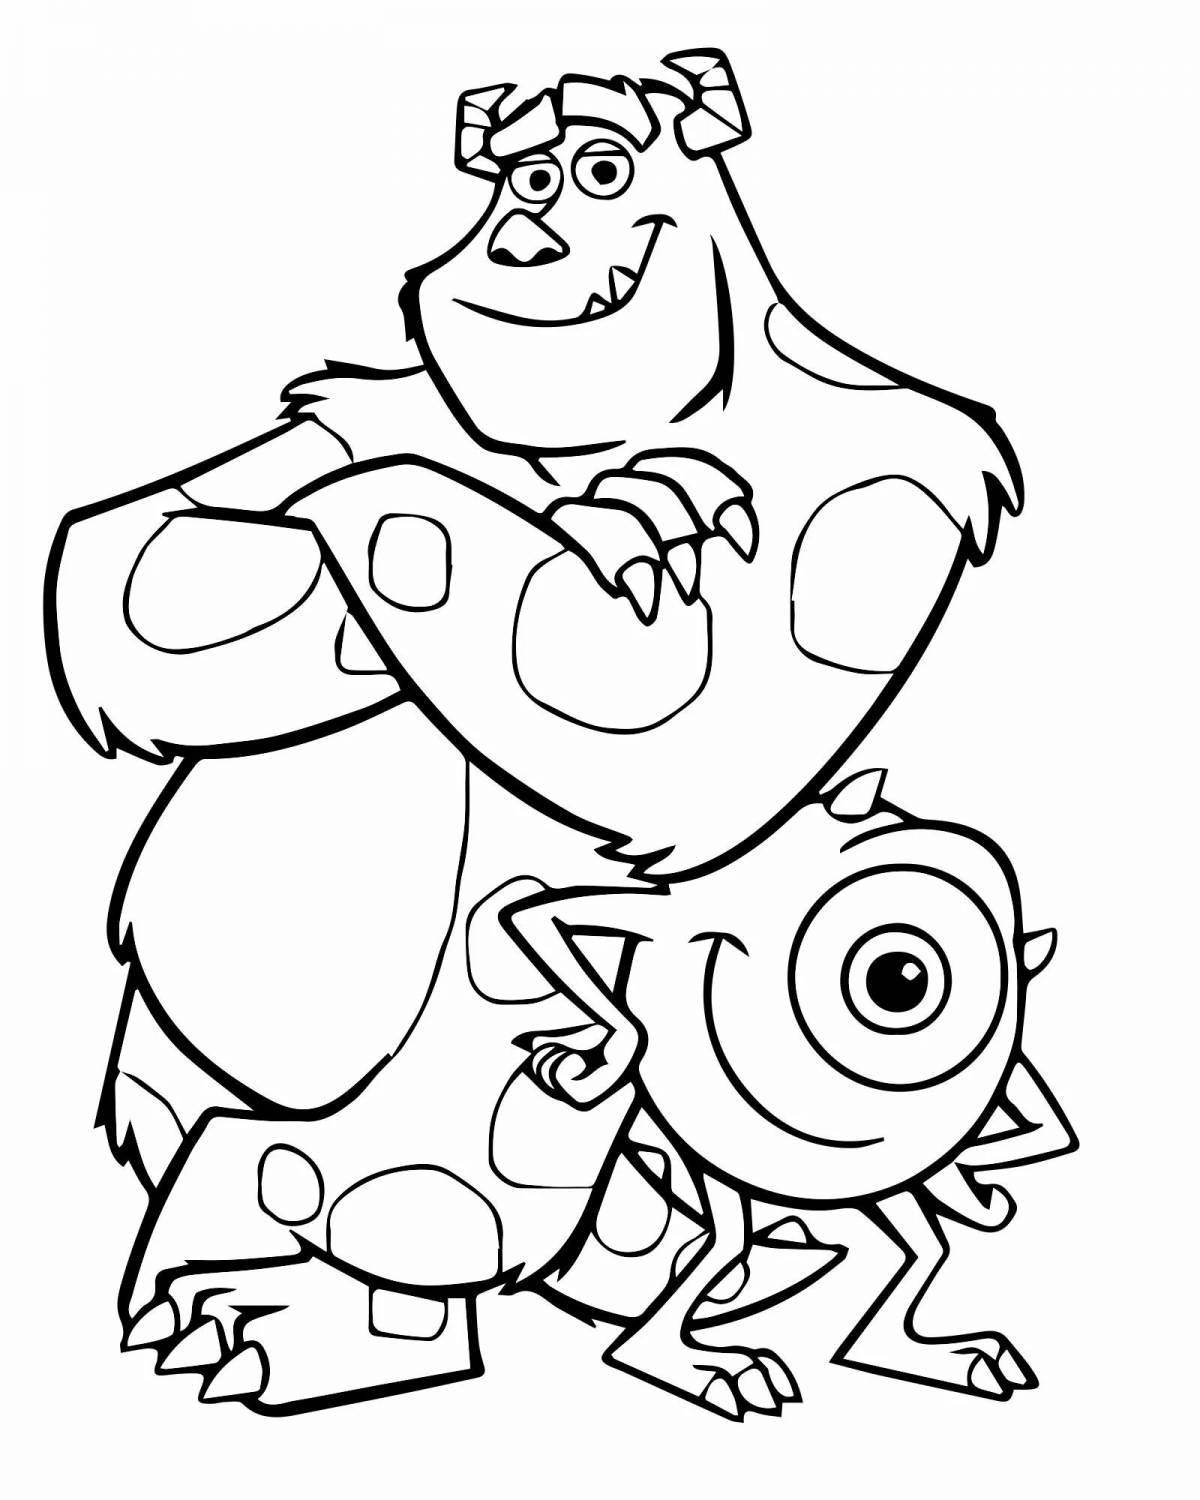 Attractive mike wazowski coloring book